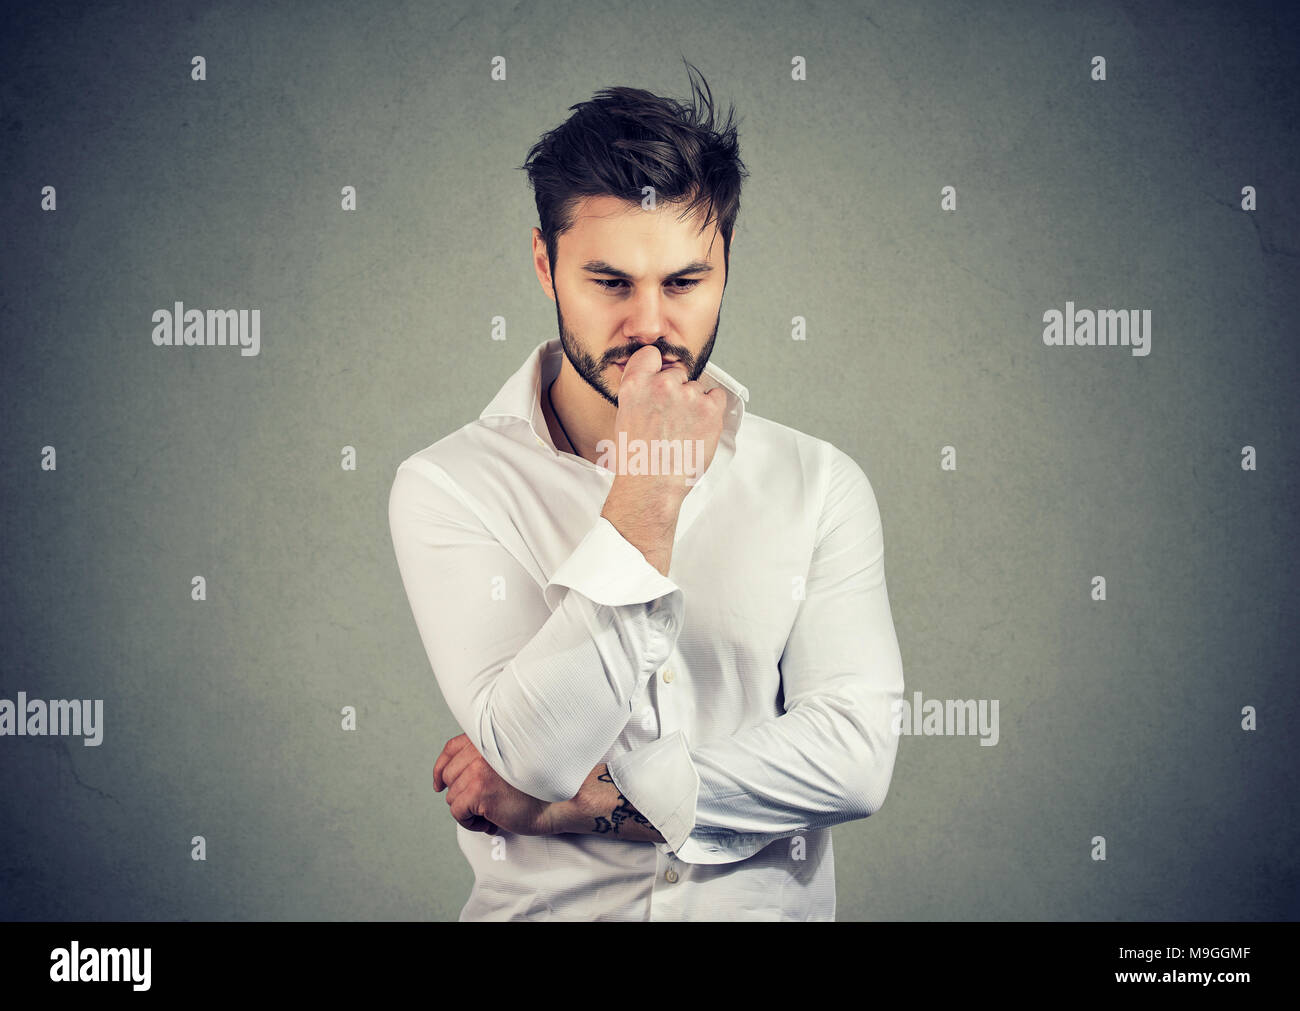 Young serious man touching lips and looking worried while solving big question in mind. Stock Photo